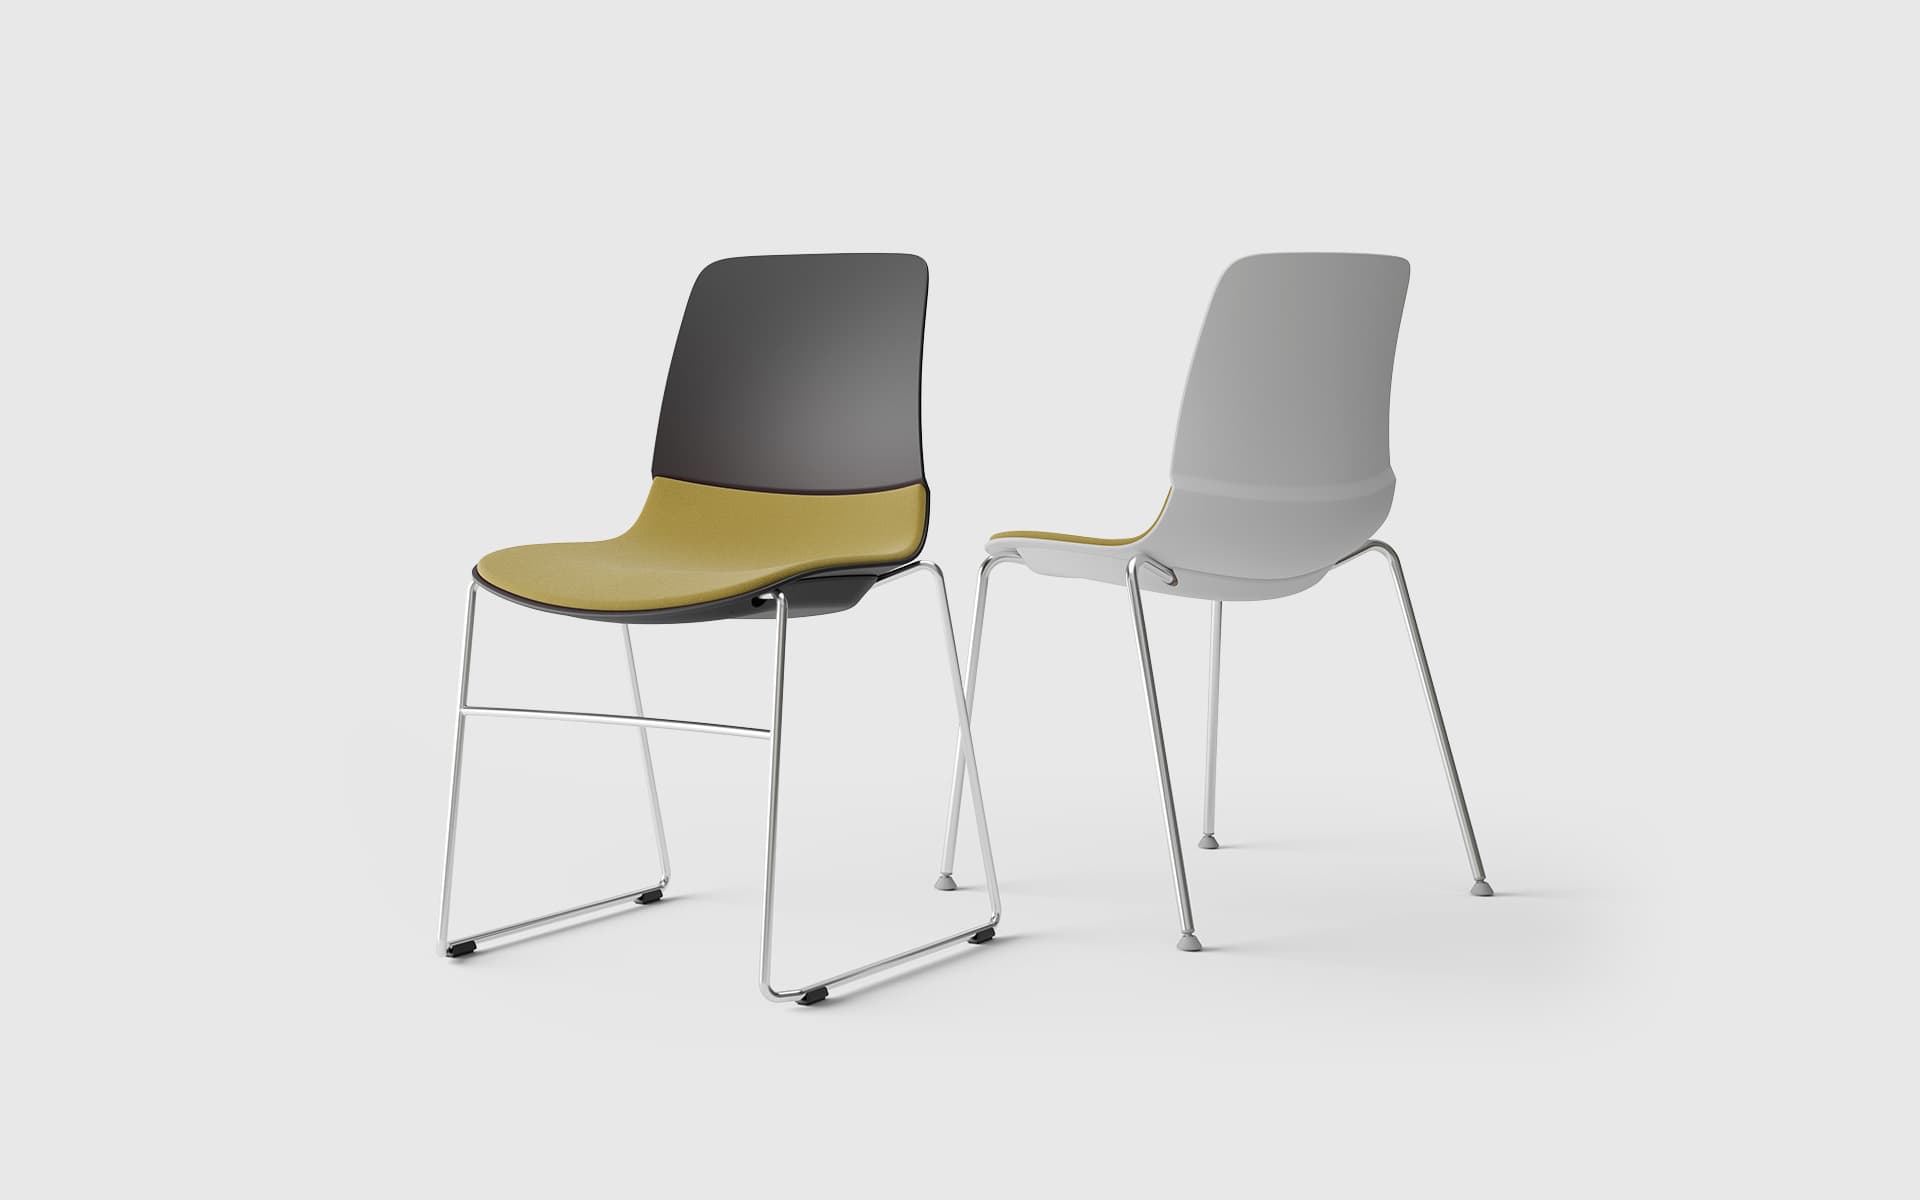 Two Patra Mika multi-purpose chairs by ITO Design in black and white with ochre-colored upholstery and with different frames